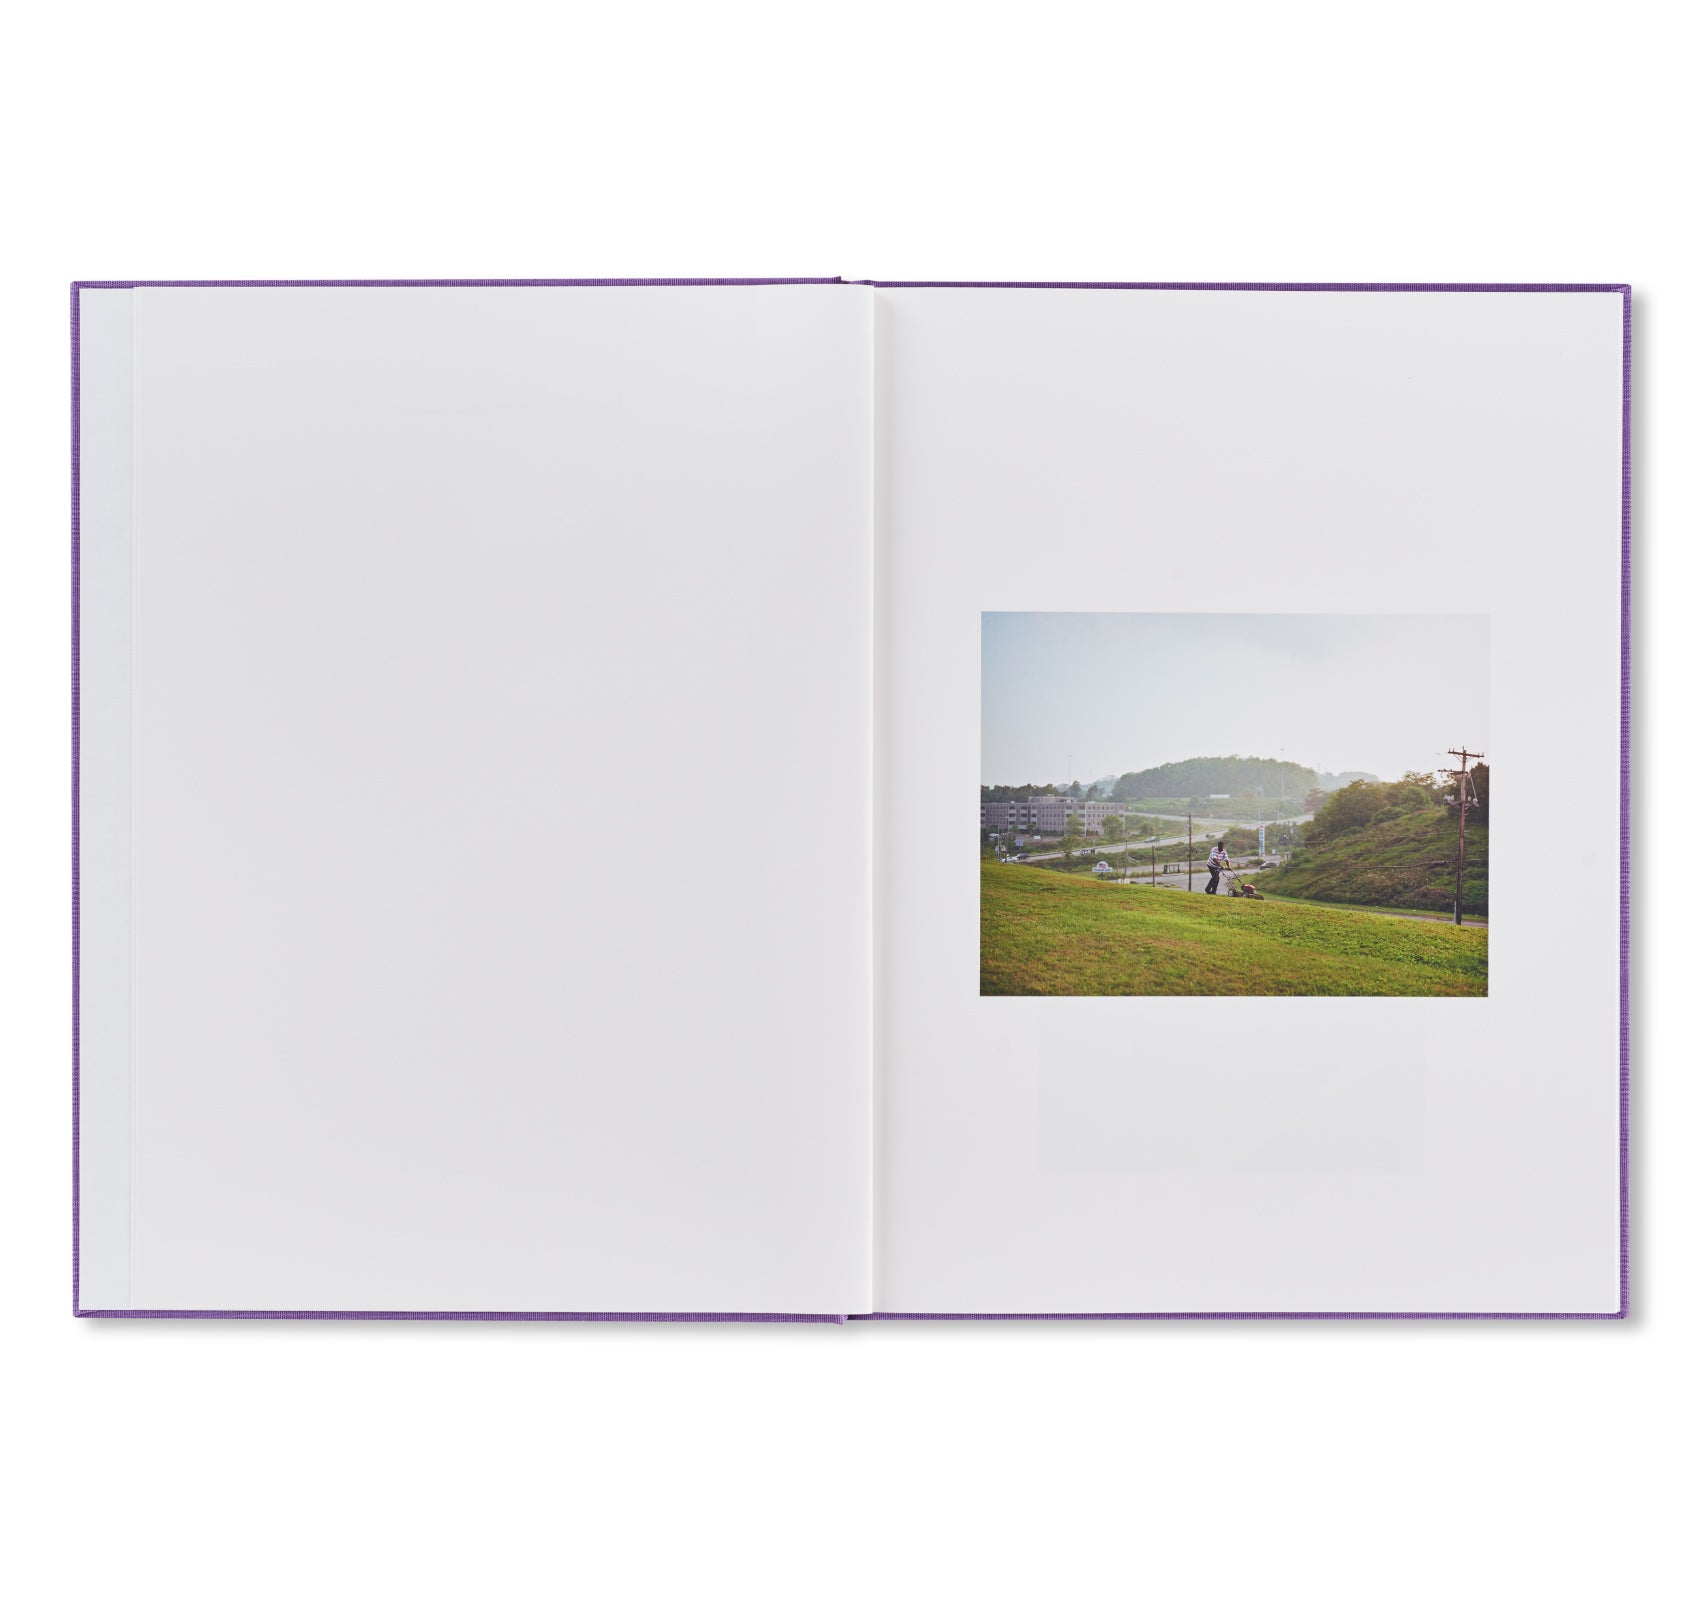 A SHIMMER OF POSSIBILITY by Paul Graham [SIGNED]